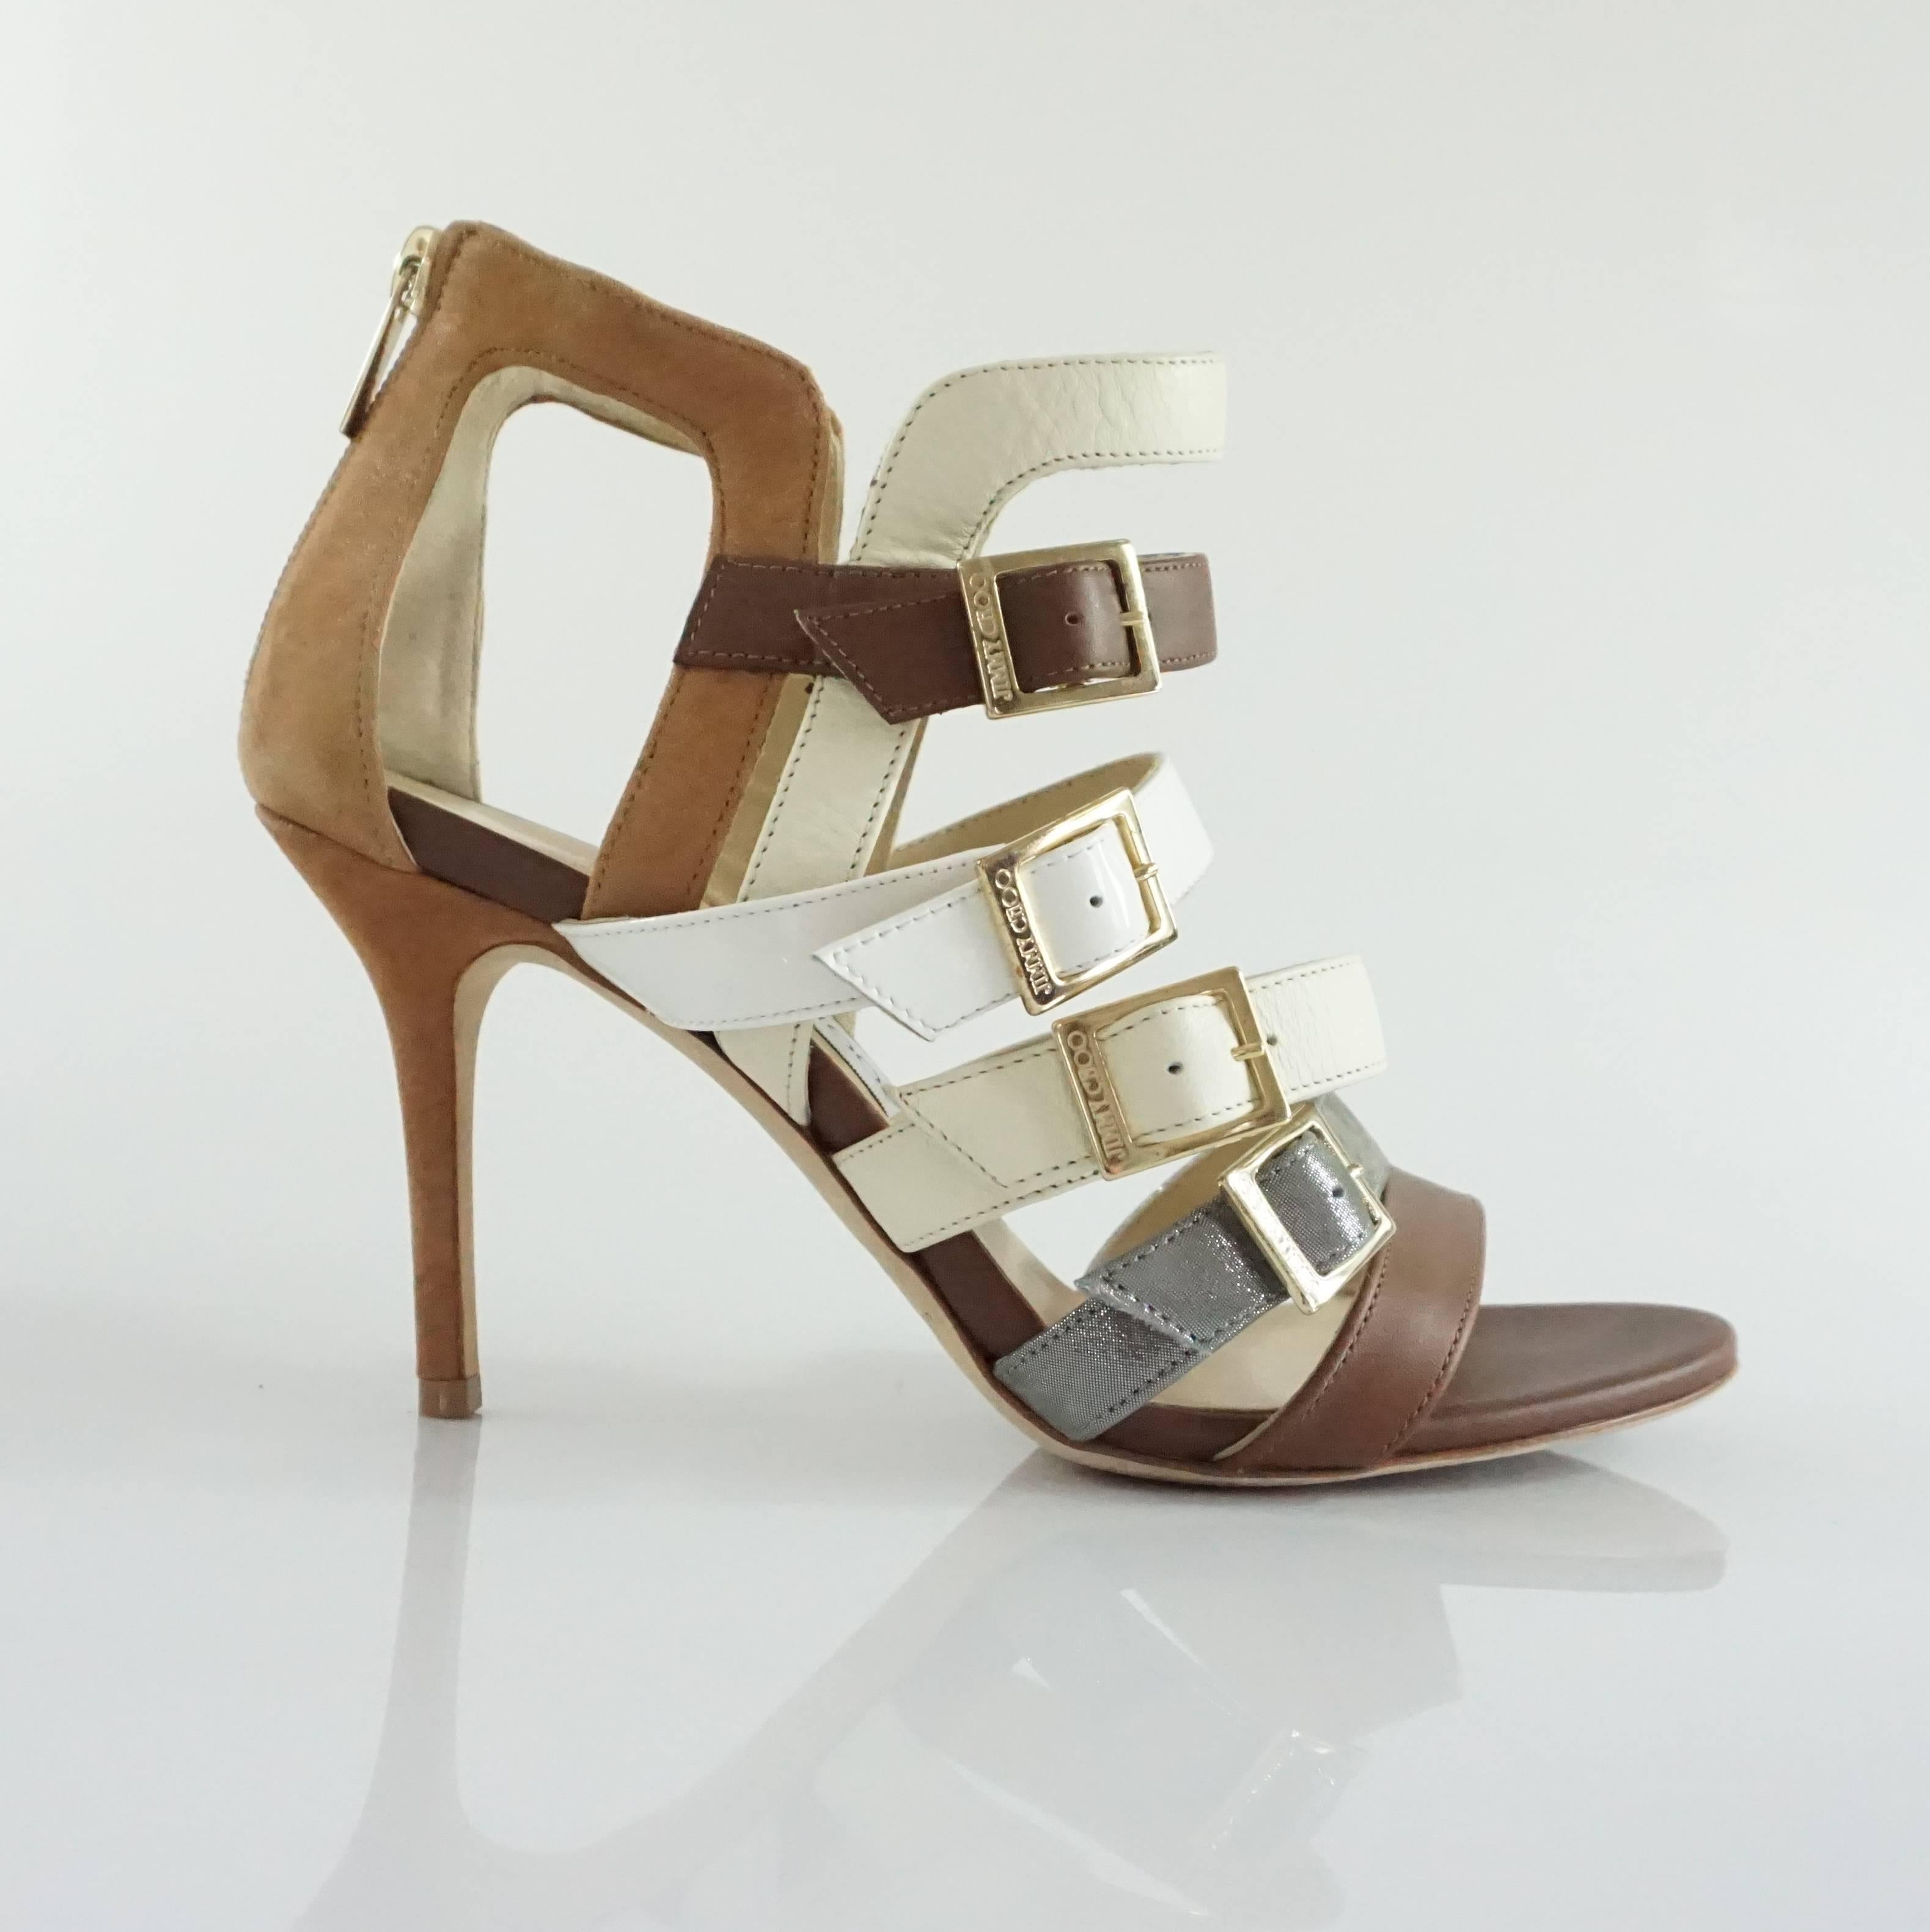 These Jimmy Choo bootie sandals have mixed fabrics (leather, patent leather, suede-like material) and are multicolored with different earthtones. There are straps of dark brown leather, white patent leather, cream leather, and a metallic silver